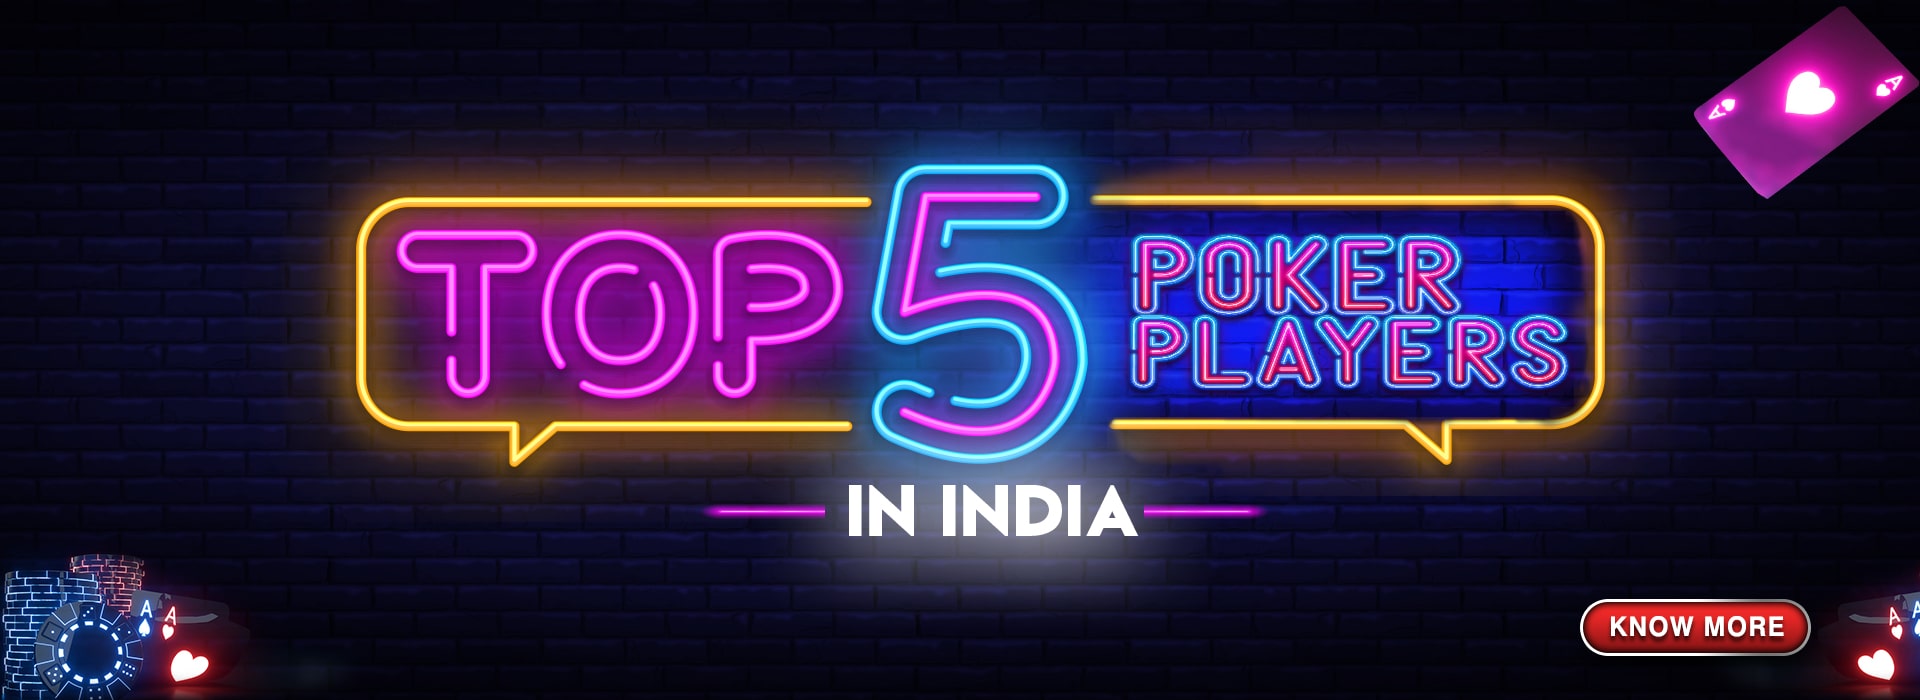 Top 5 Poker Players in India - Indian Poker